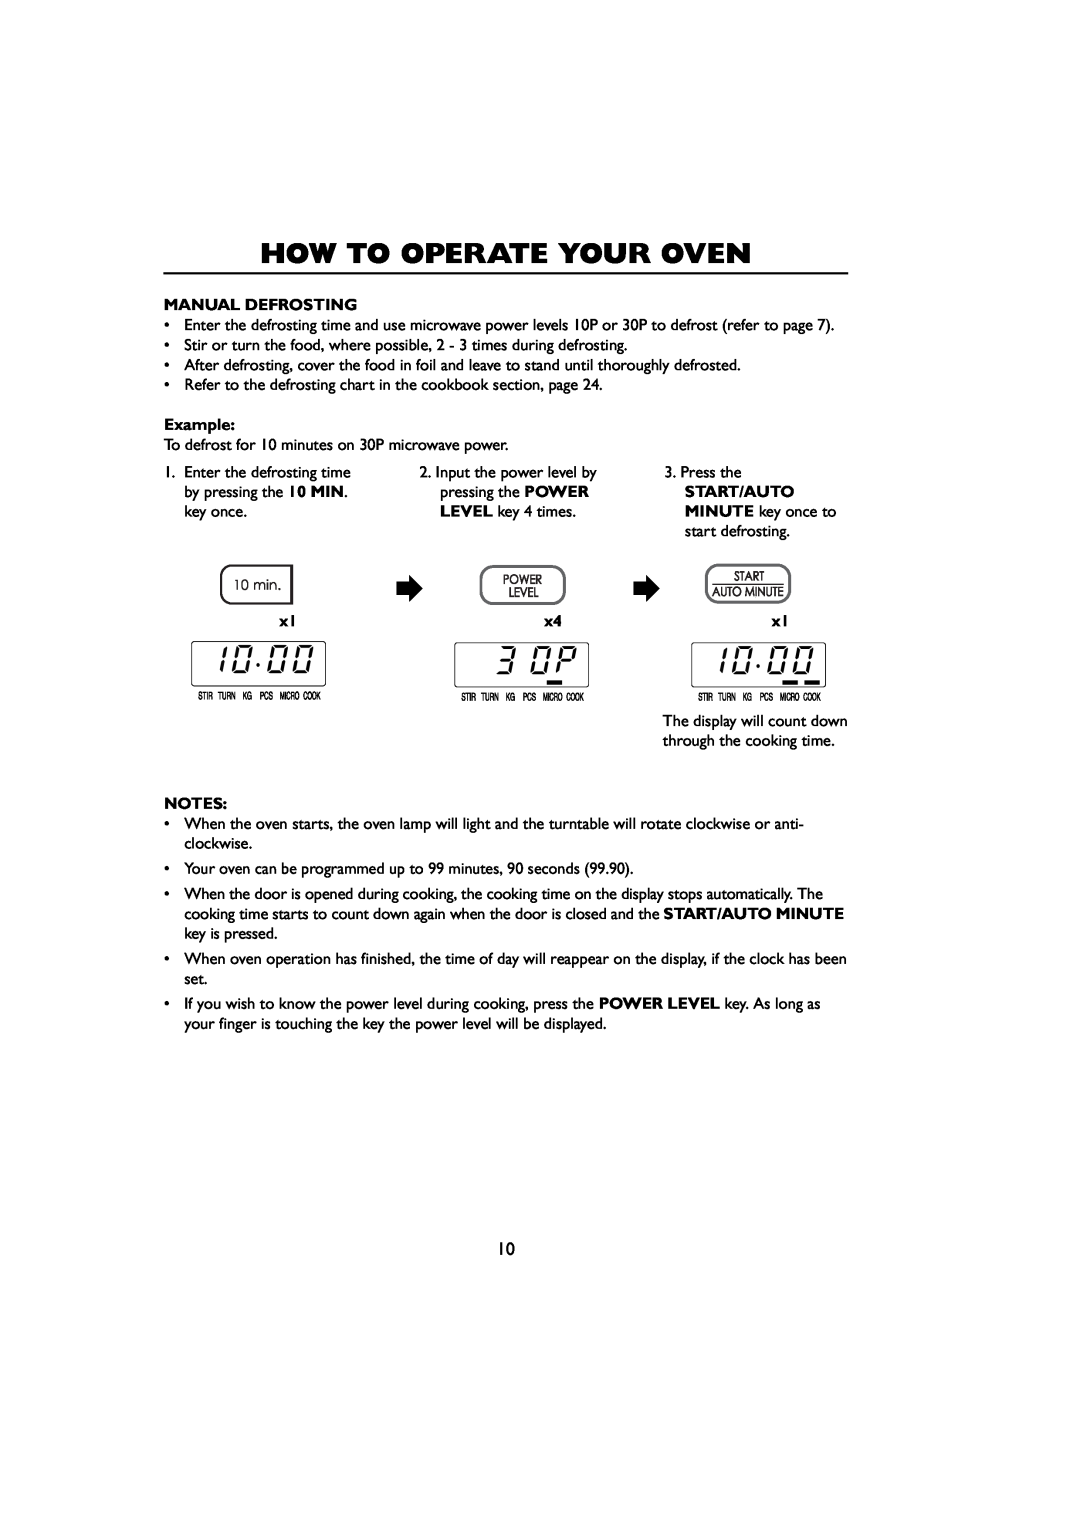 Sharp R-259 operation manual Manual Defrosting, How To Operate Your Oven, Example, Start/Auto 